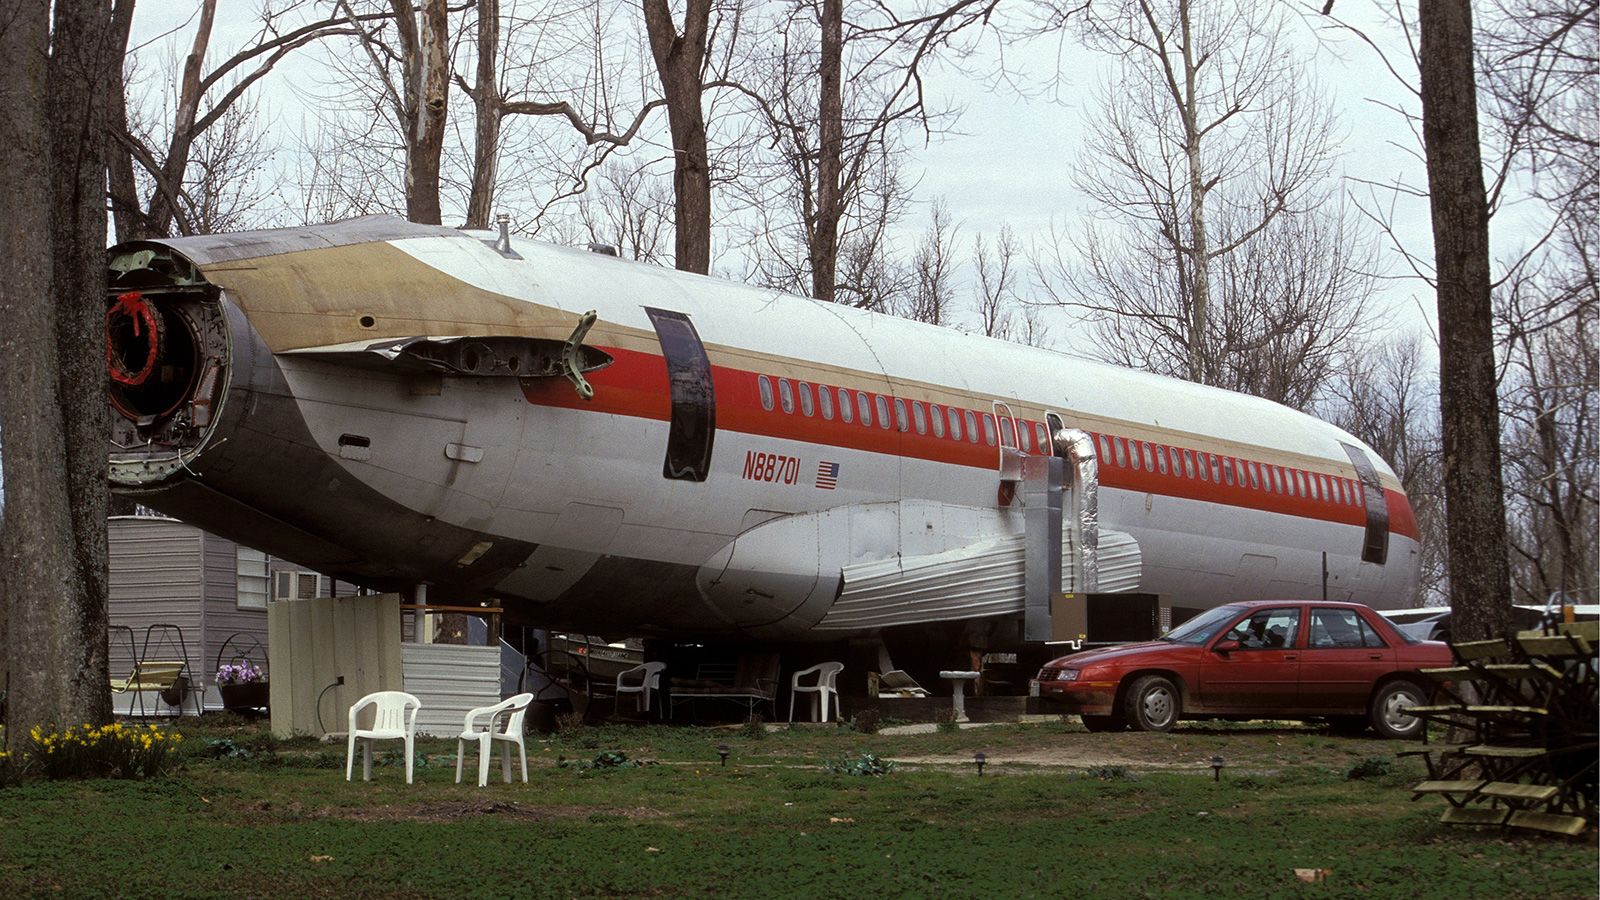 The people who live inside airplanes | CNN